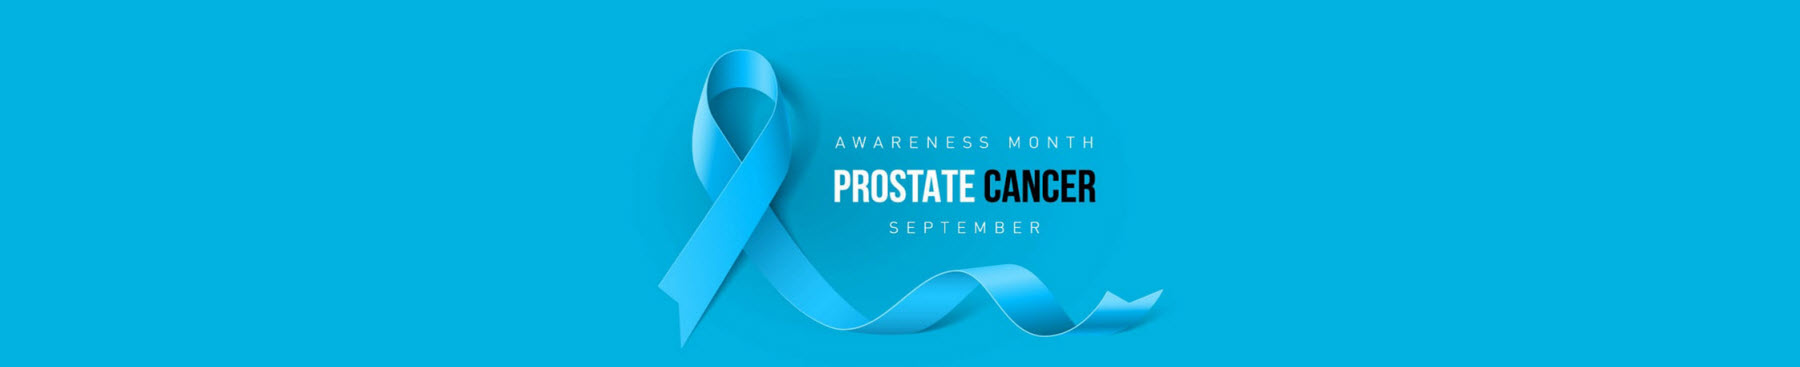 SA Harnesses Prostate Cancer Awareness Month